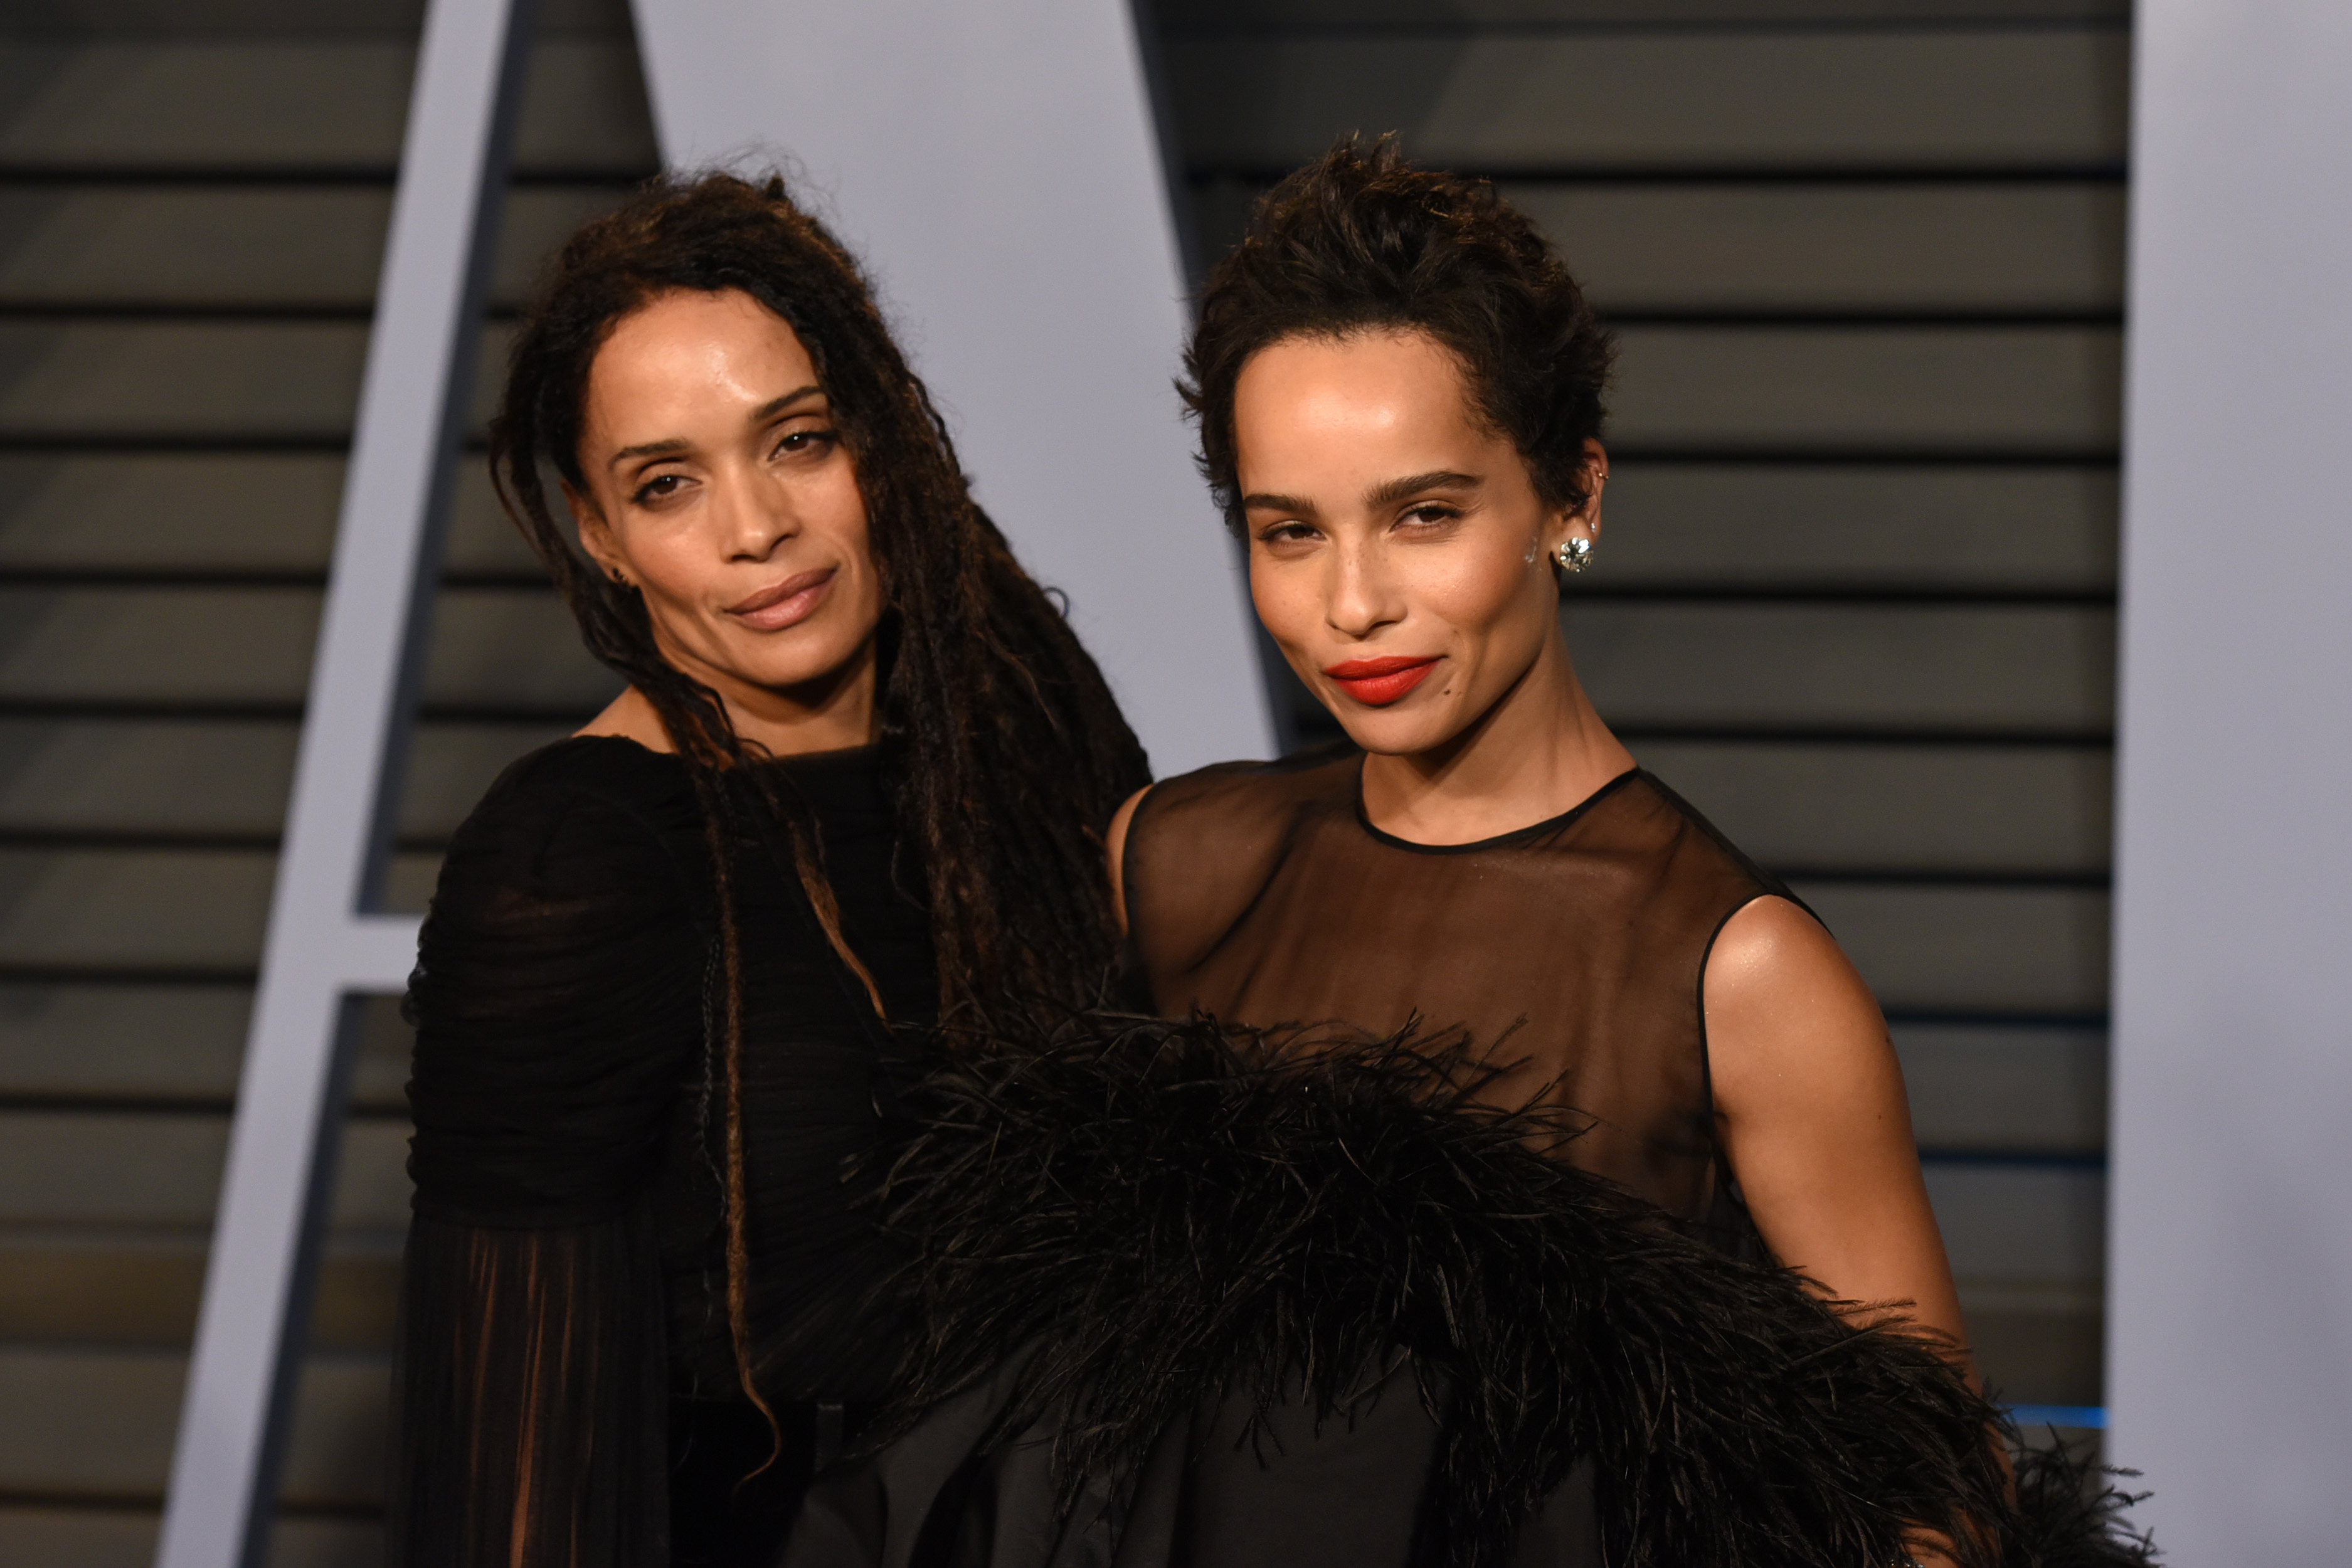 Zoe Kravitz and Lisa Bonet attend the 2018 Vanity Fair Oscar Party on March 4, 2018 in Beverly Hills, California | Source: Getty Images